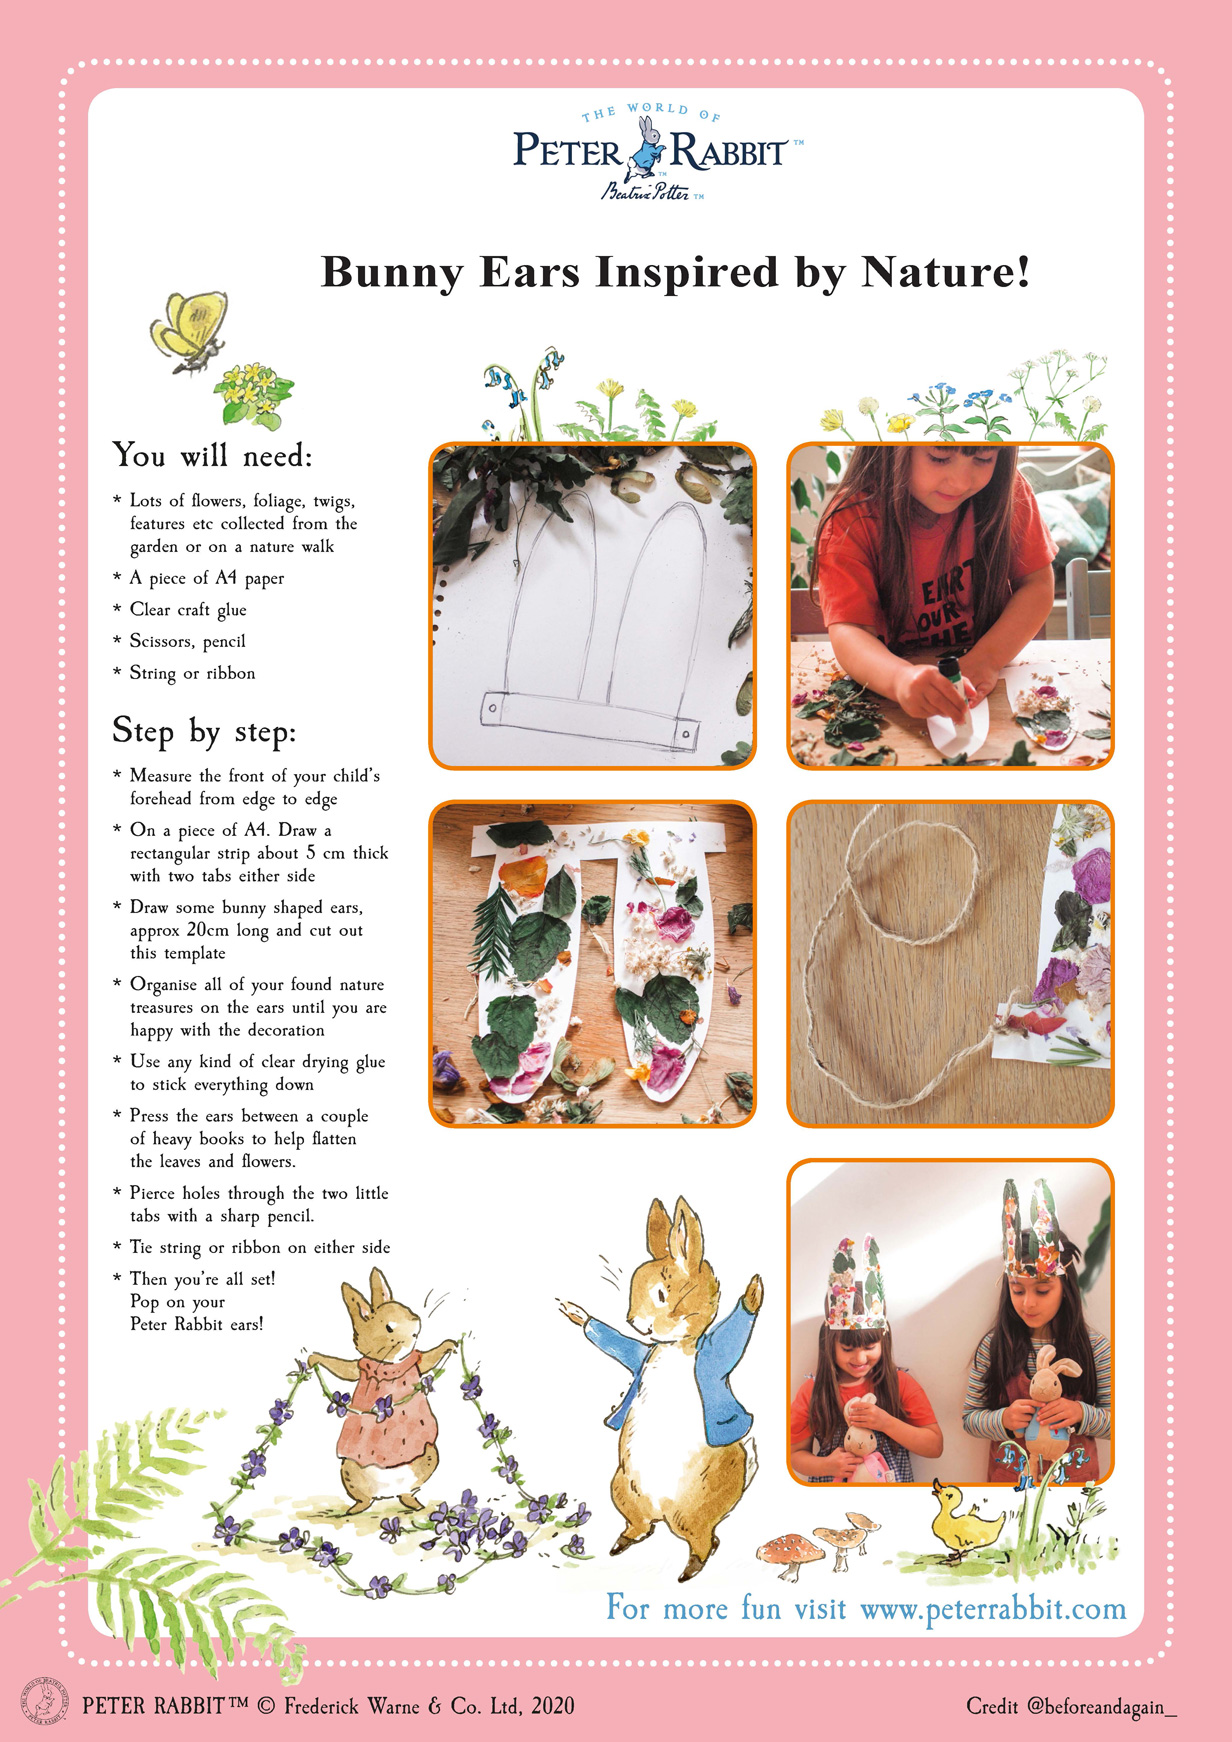 The cover image of the Nature Bunny Ears Activity Pack on the Peter Rabbit website